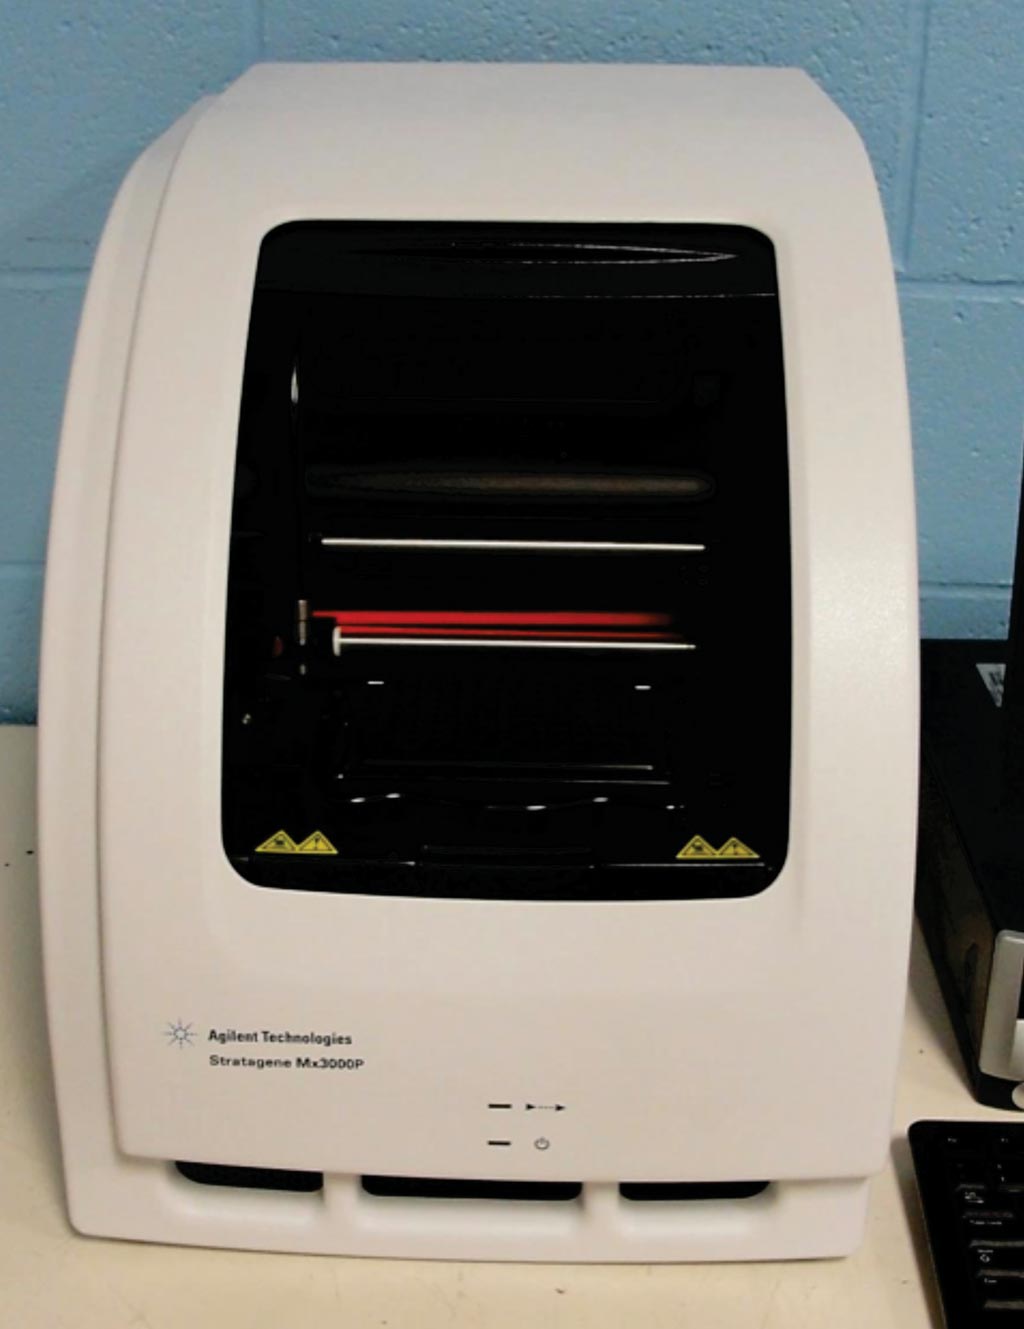 Image: The Stratagene Mx3000P thermal cycler (Photo courtesy of Agilent Technologies).